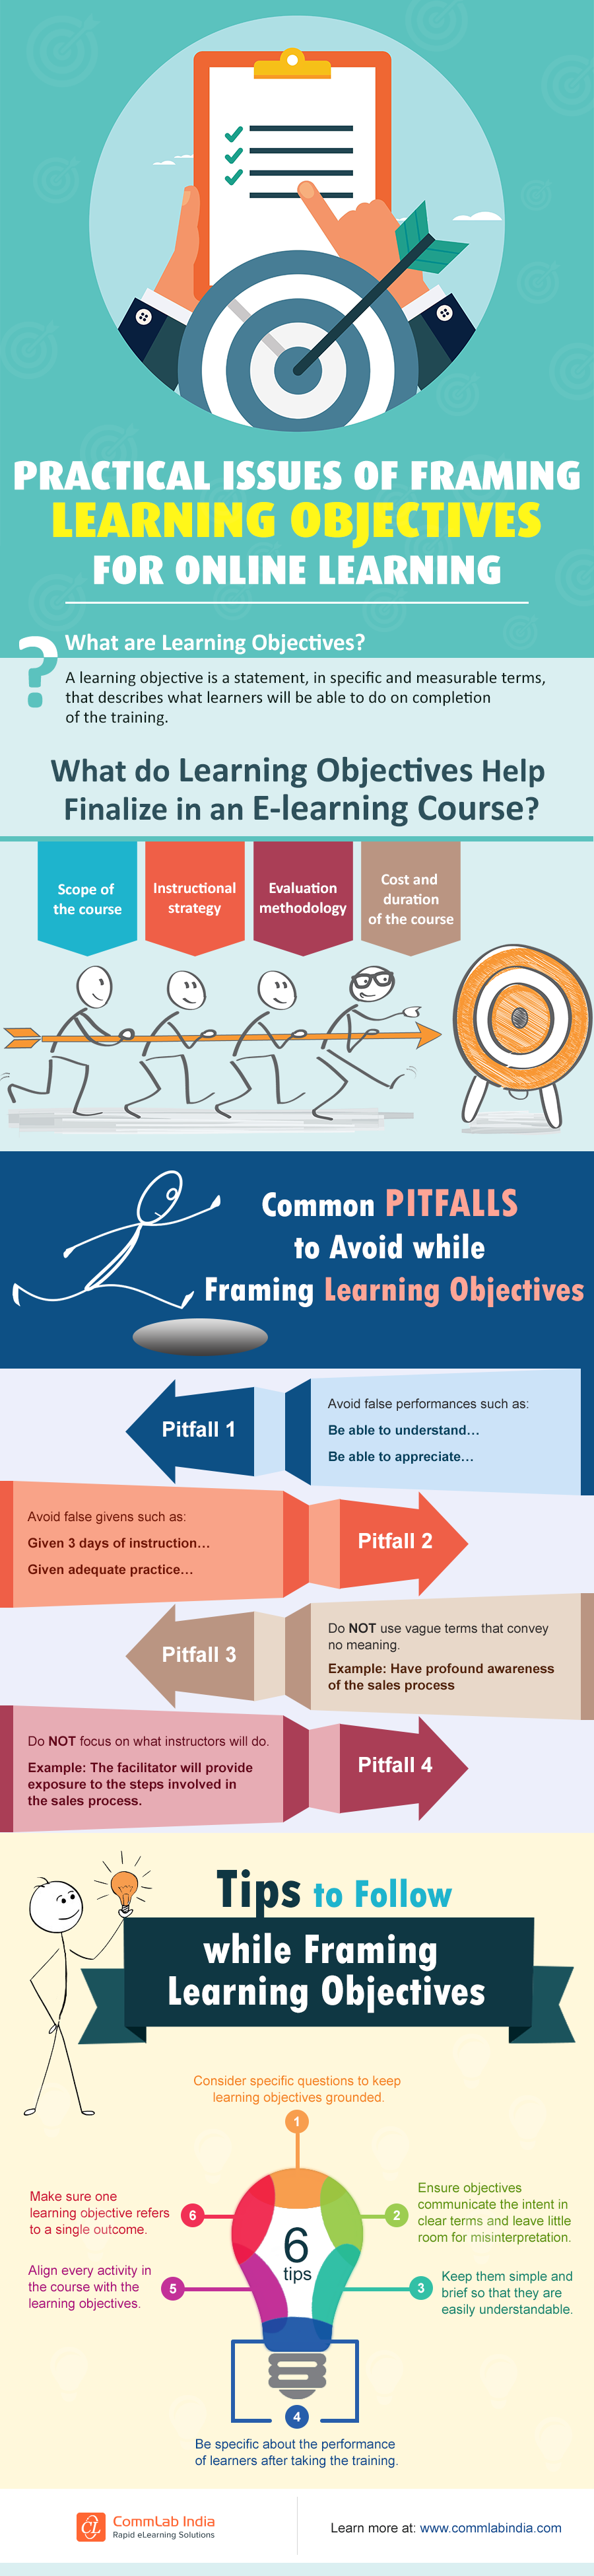 Practical Issues of Framing Learning Objectives for Online Learning [Infographic]